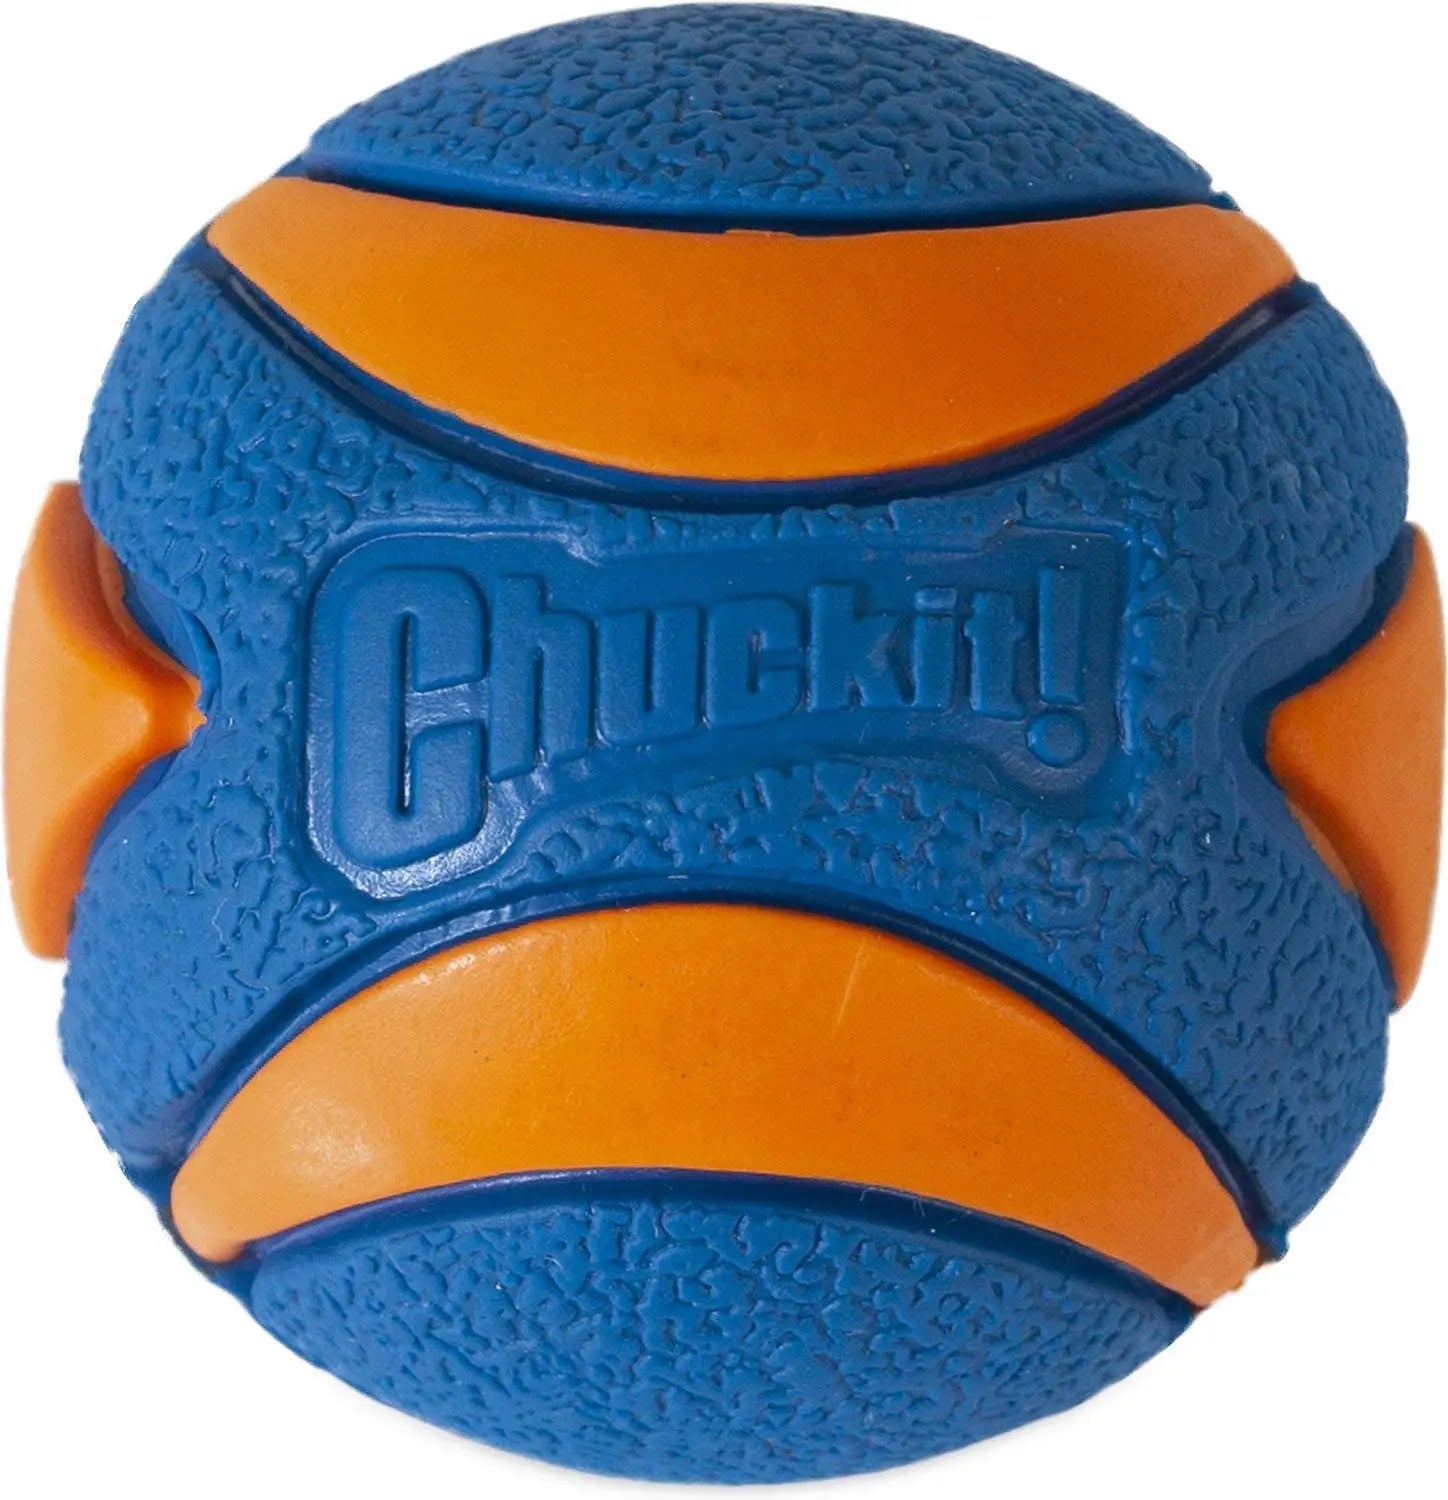 Ultra Squeaker Ball Dog Toys Developed High Bounce Constructed Of Durable Easy To Clean Rubber Pet Supplies  petlums.com   